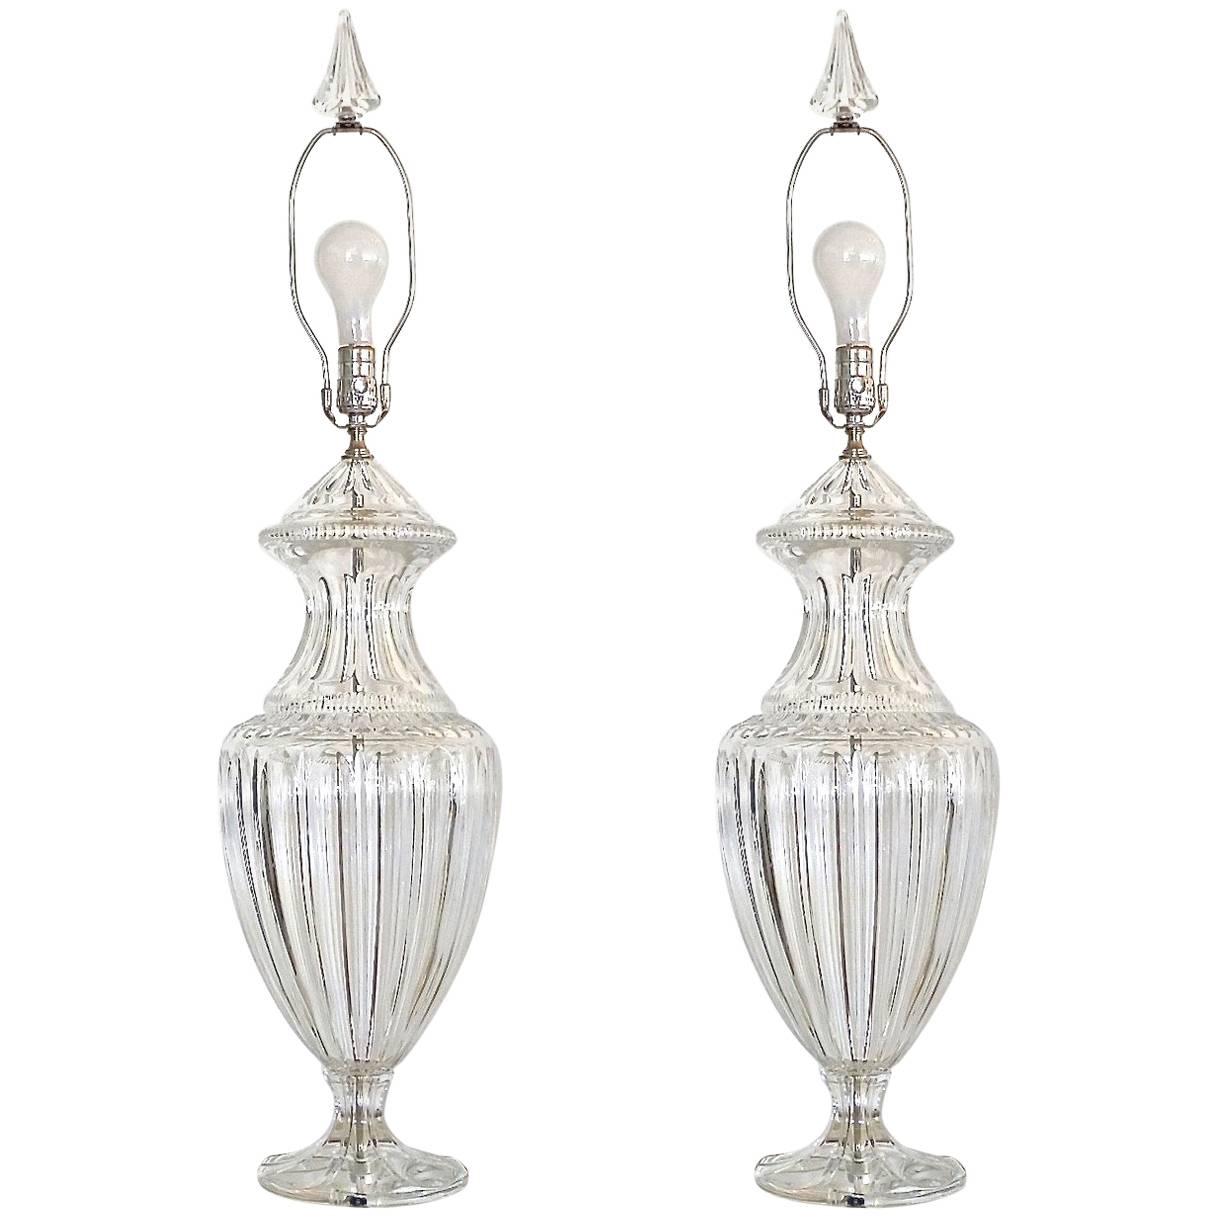 Pair of Baccarat Form Crystal Lamps